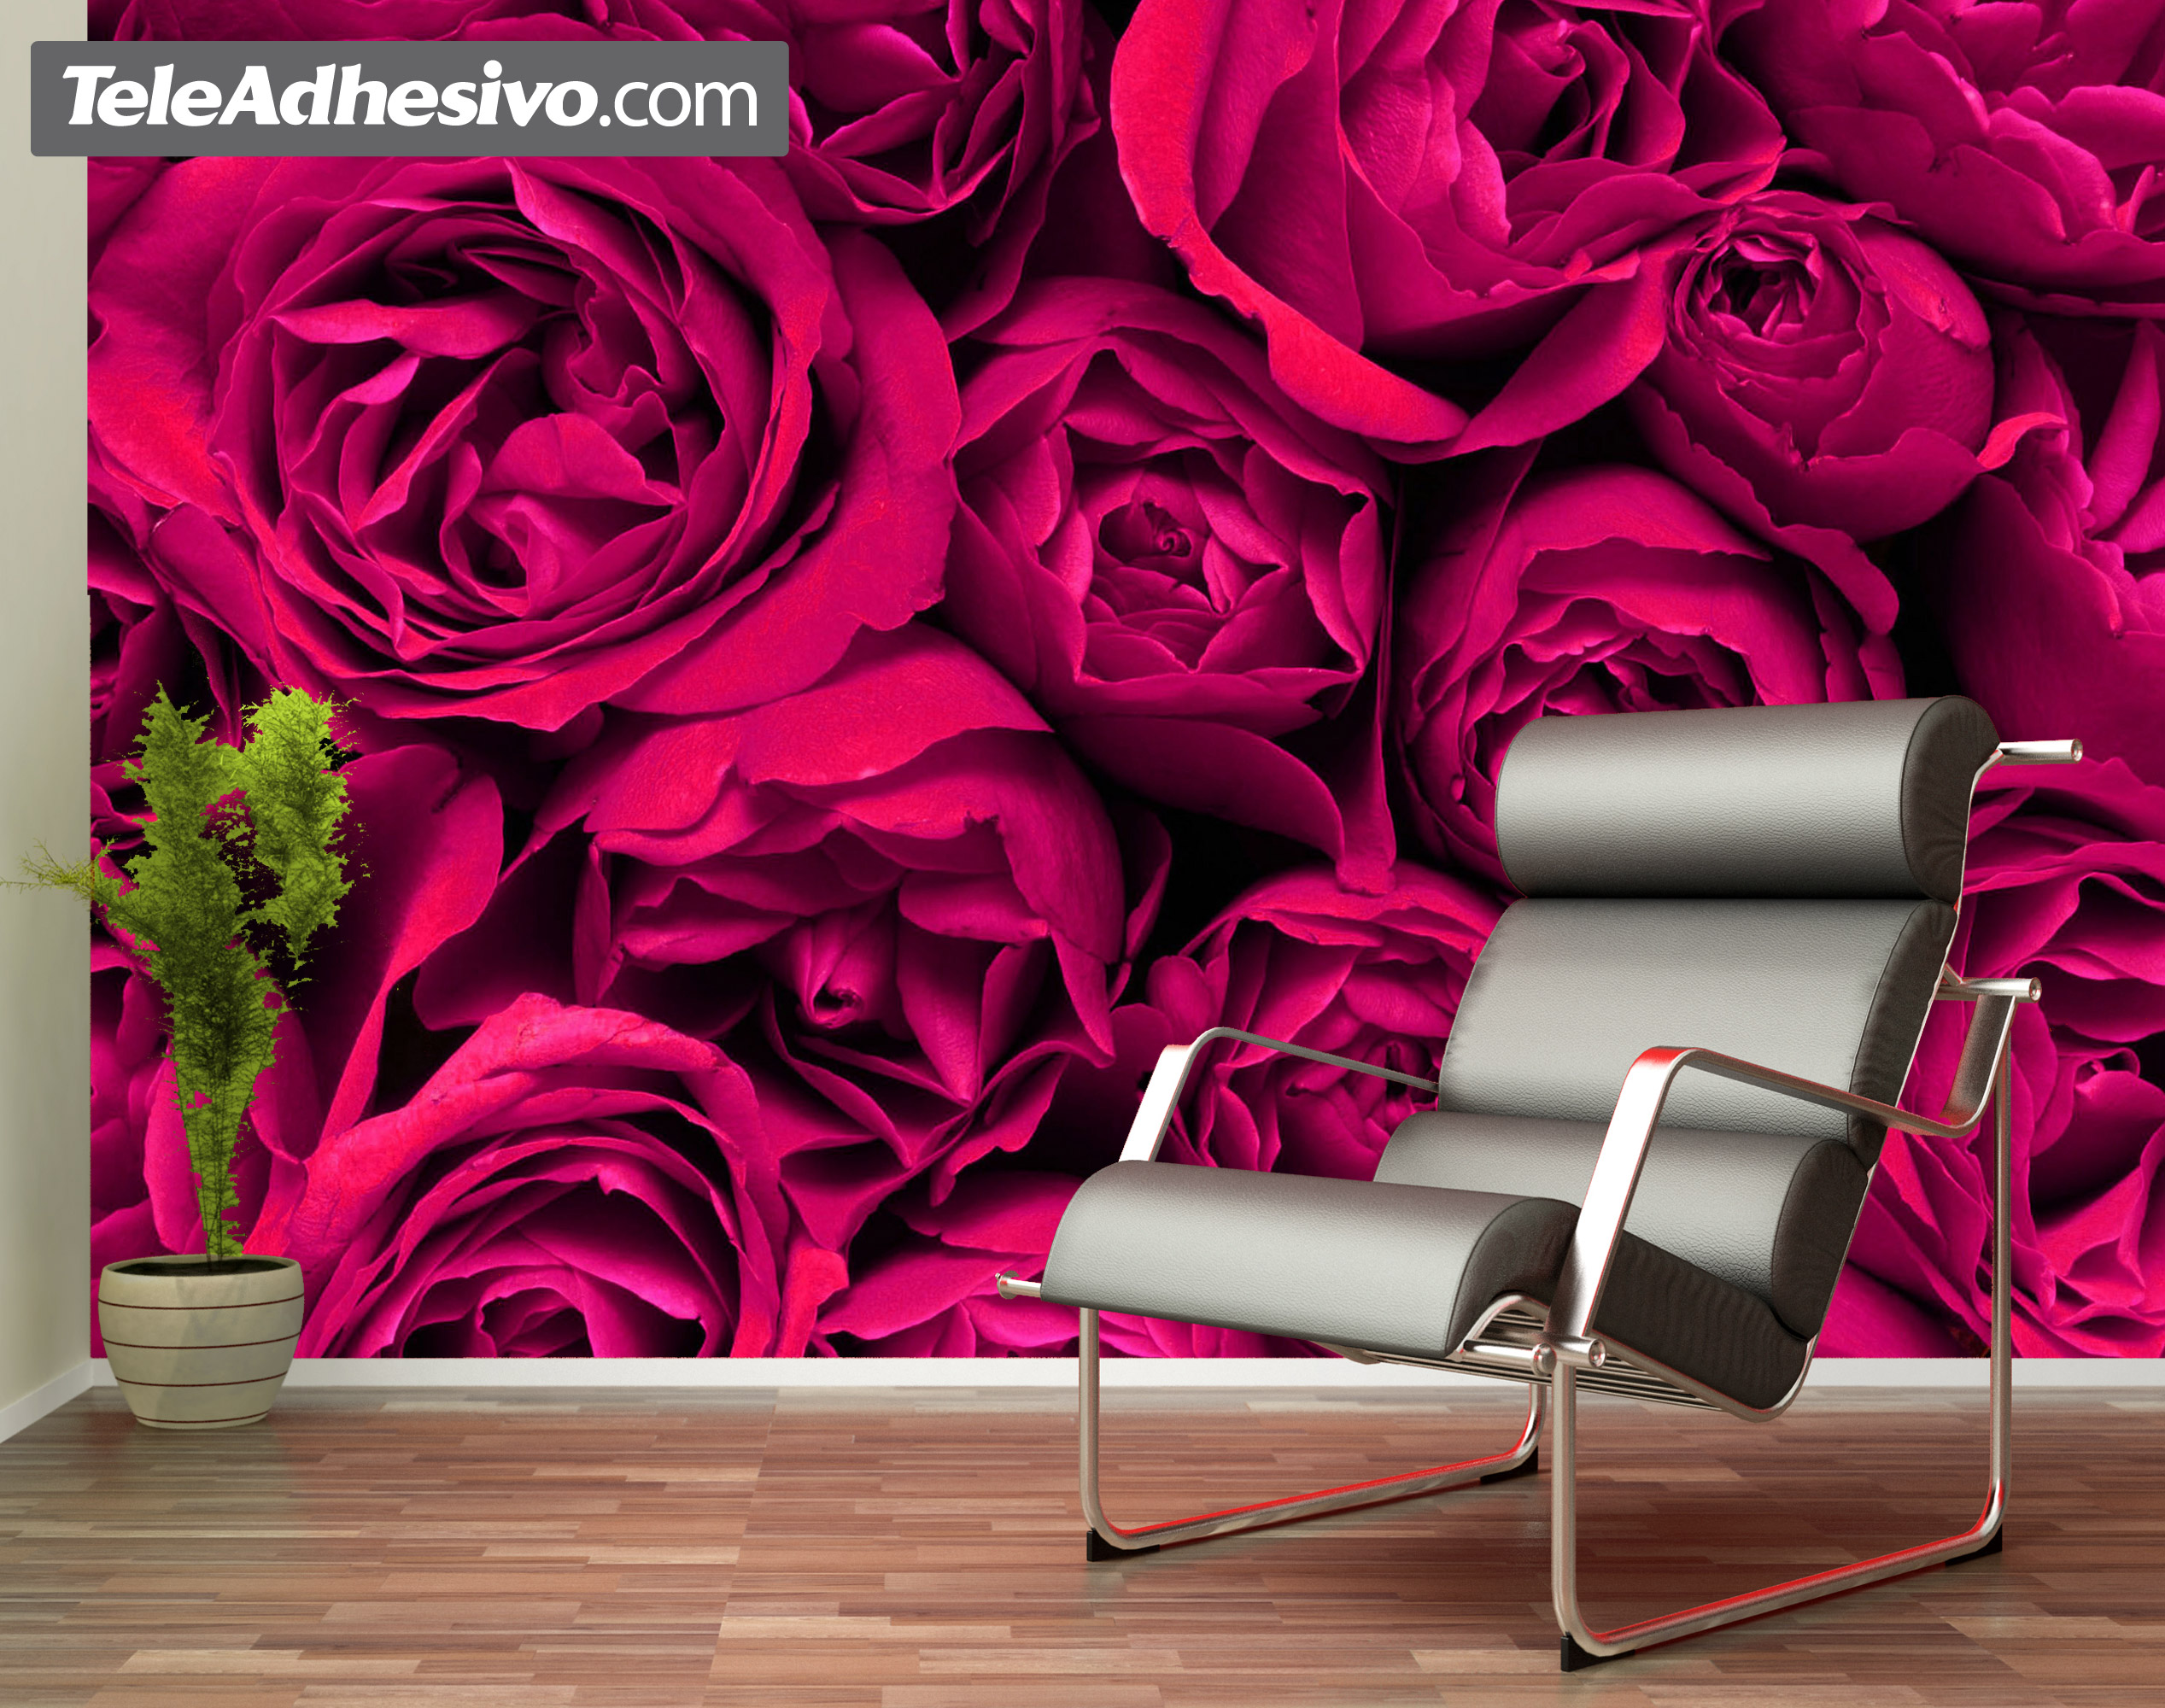 Wall Murals: Together Rose